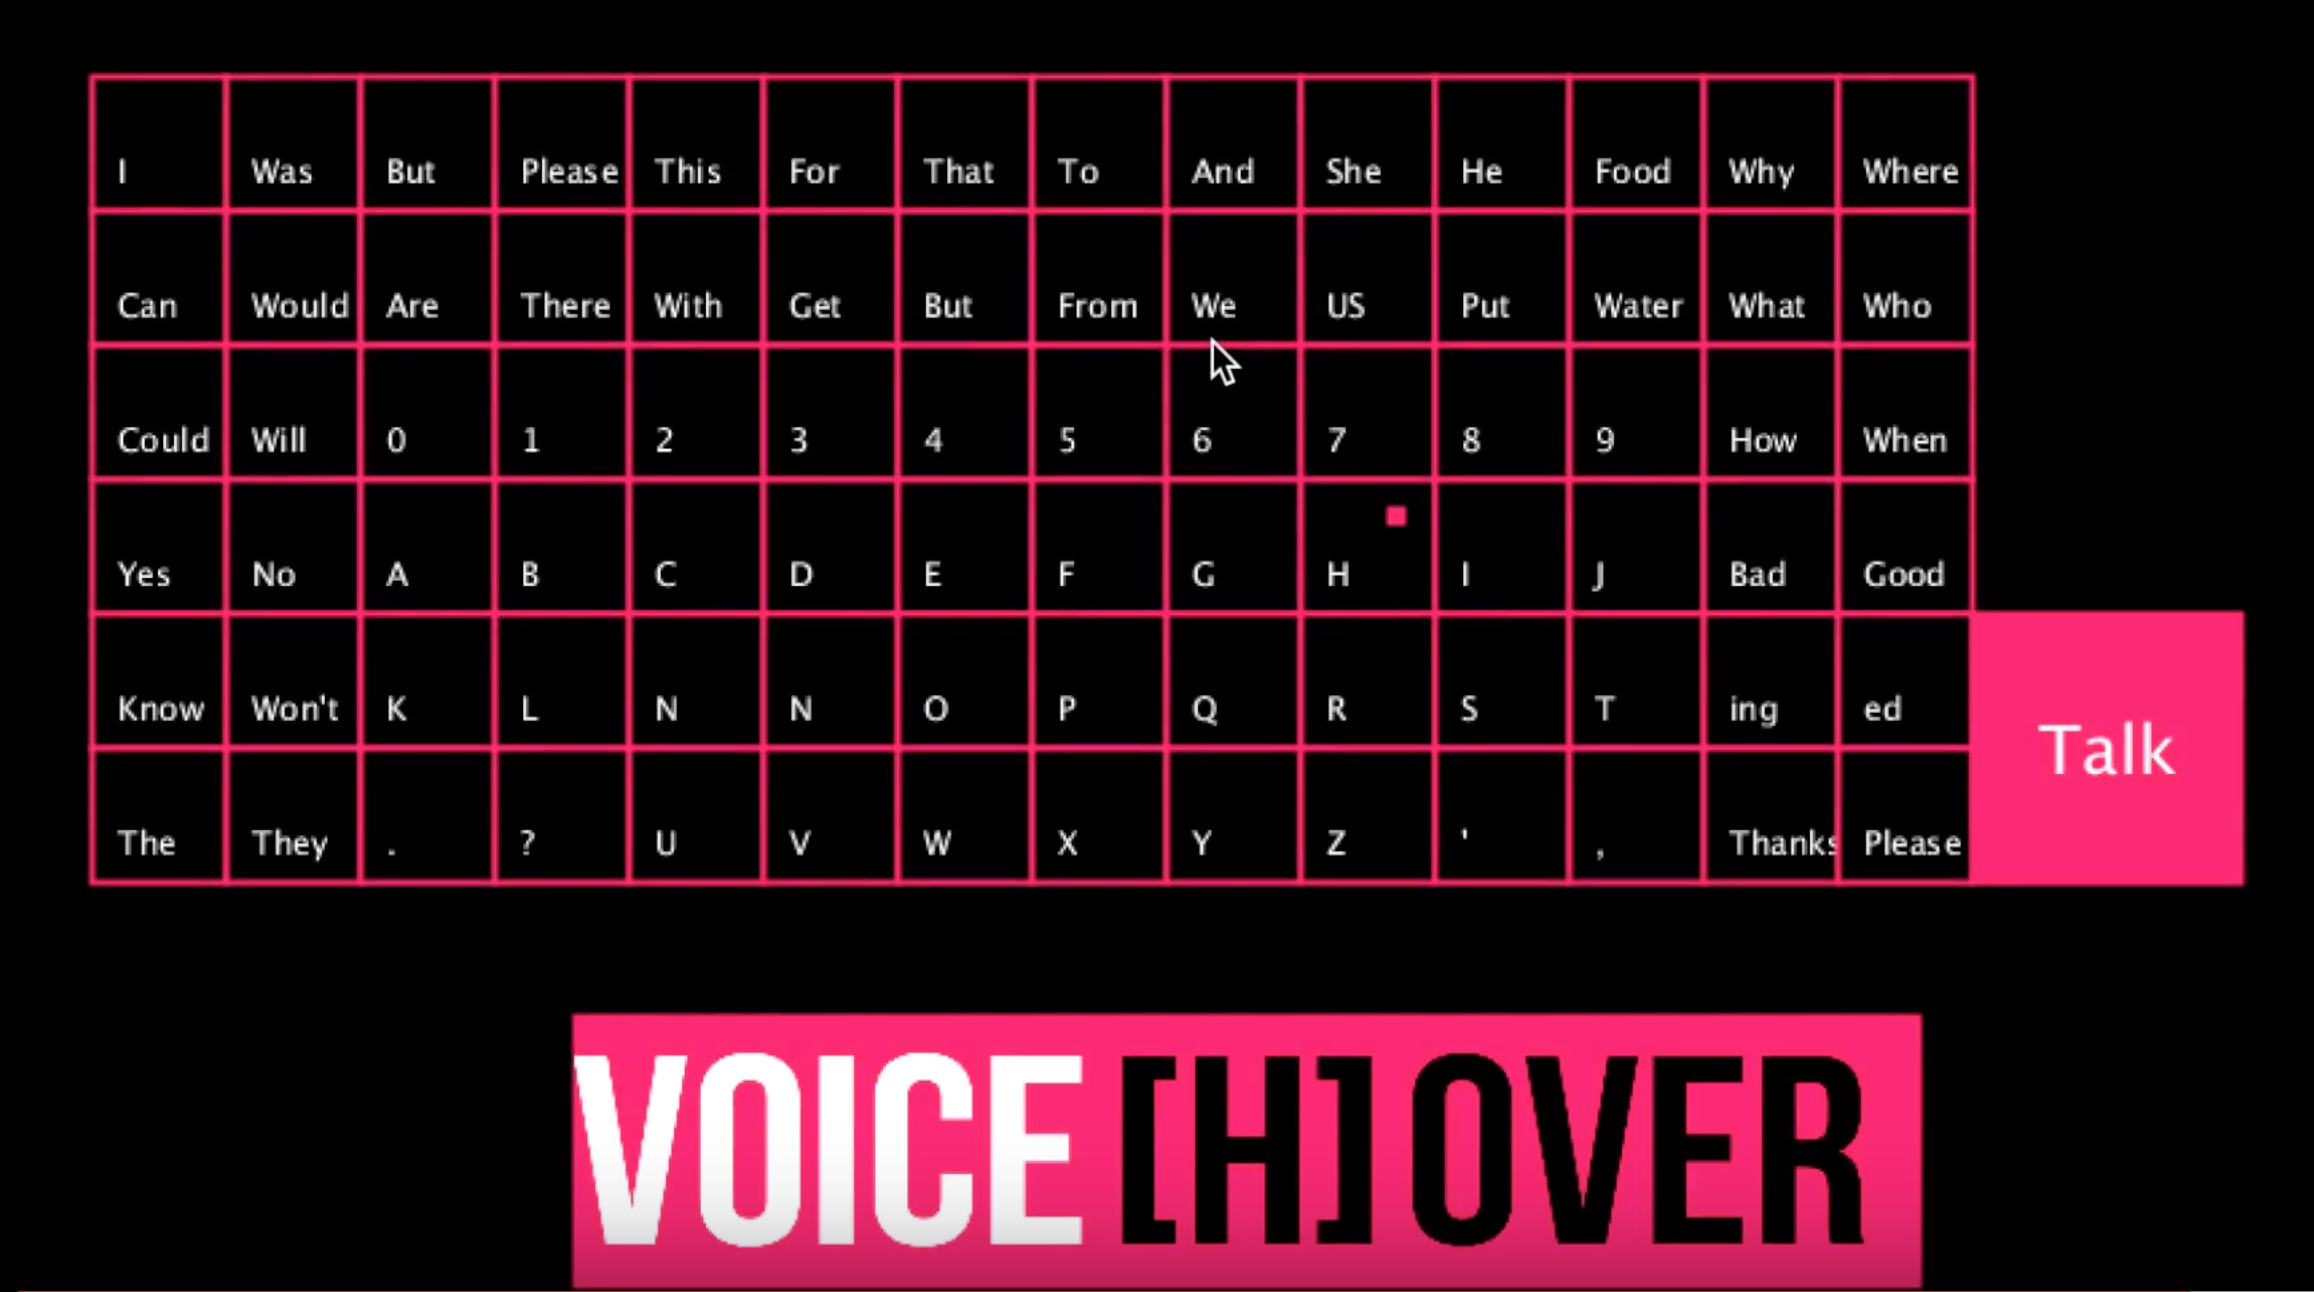 VoiceHover